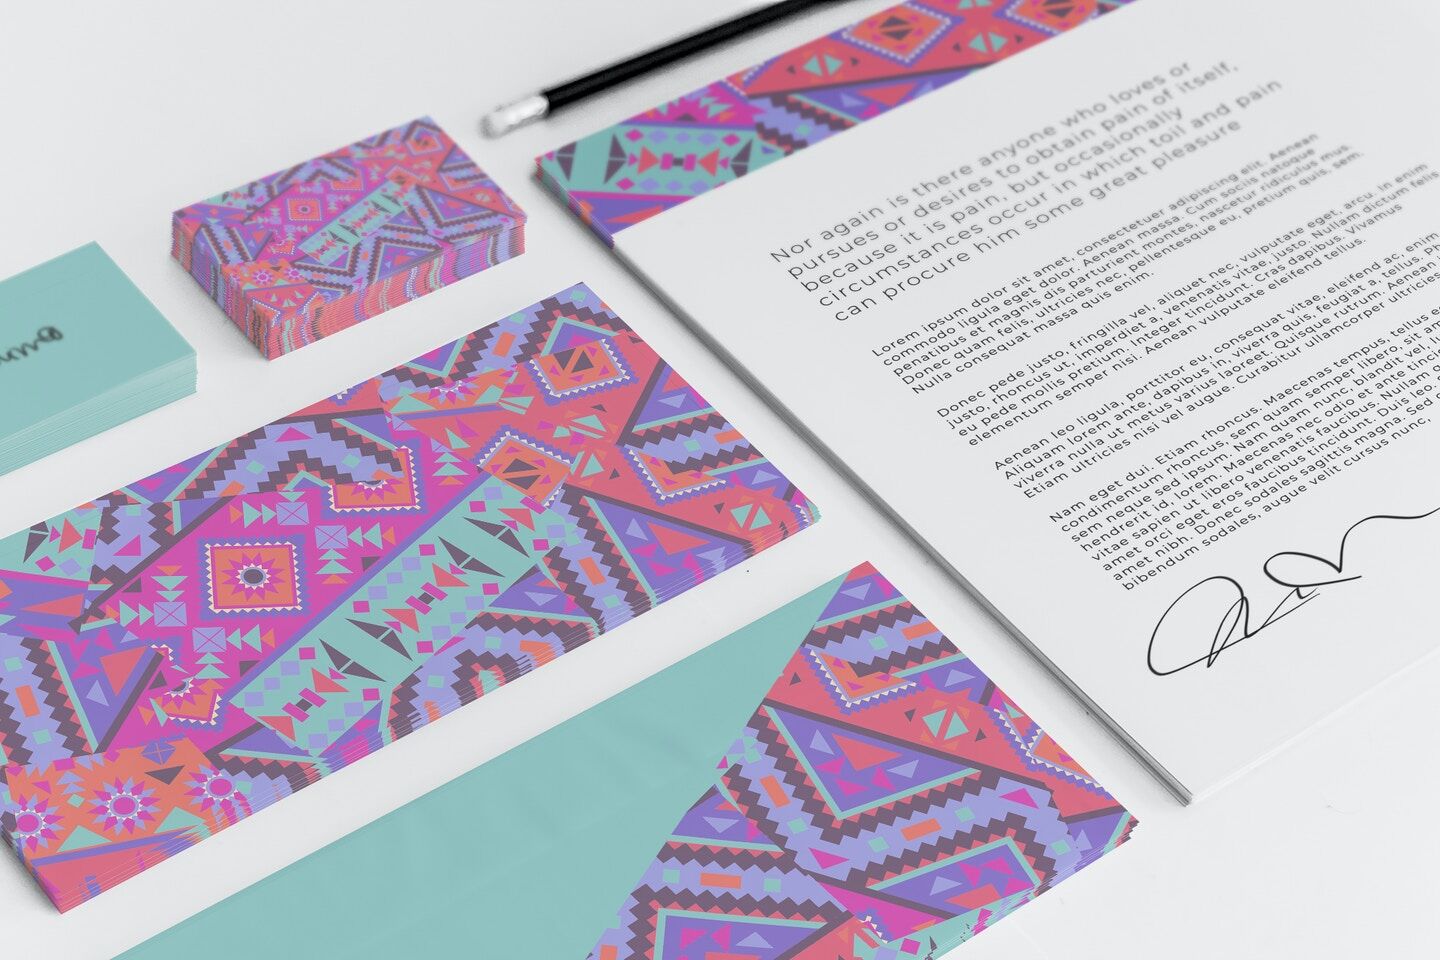 Stationery Mockup Featuring Cards, Envelope and Paper FREE PSD